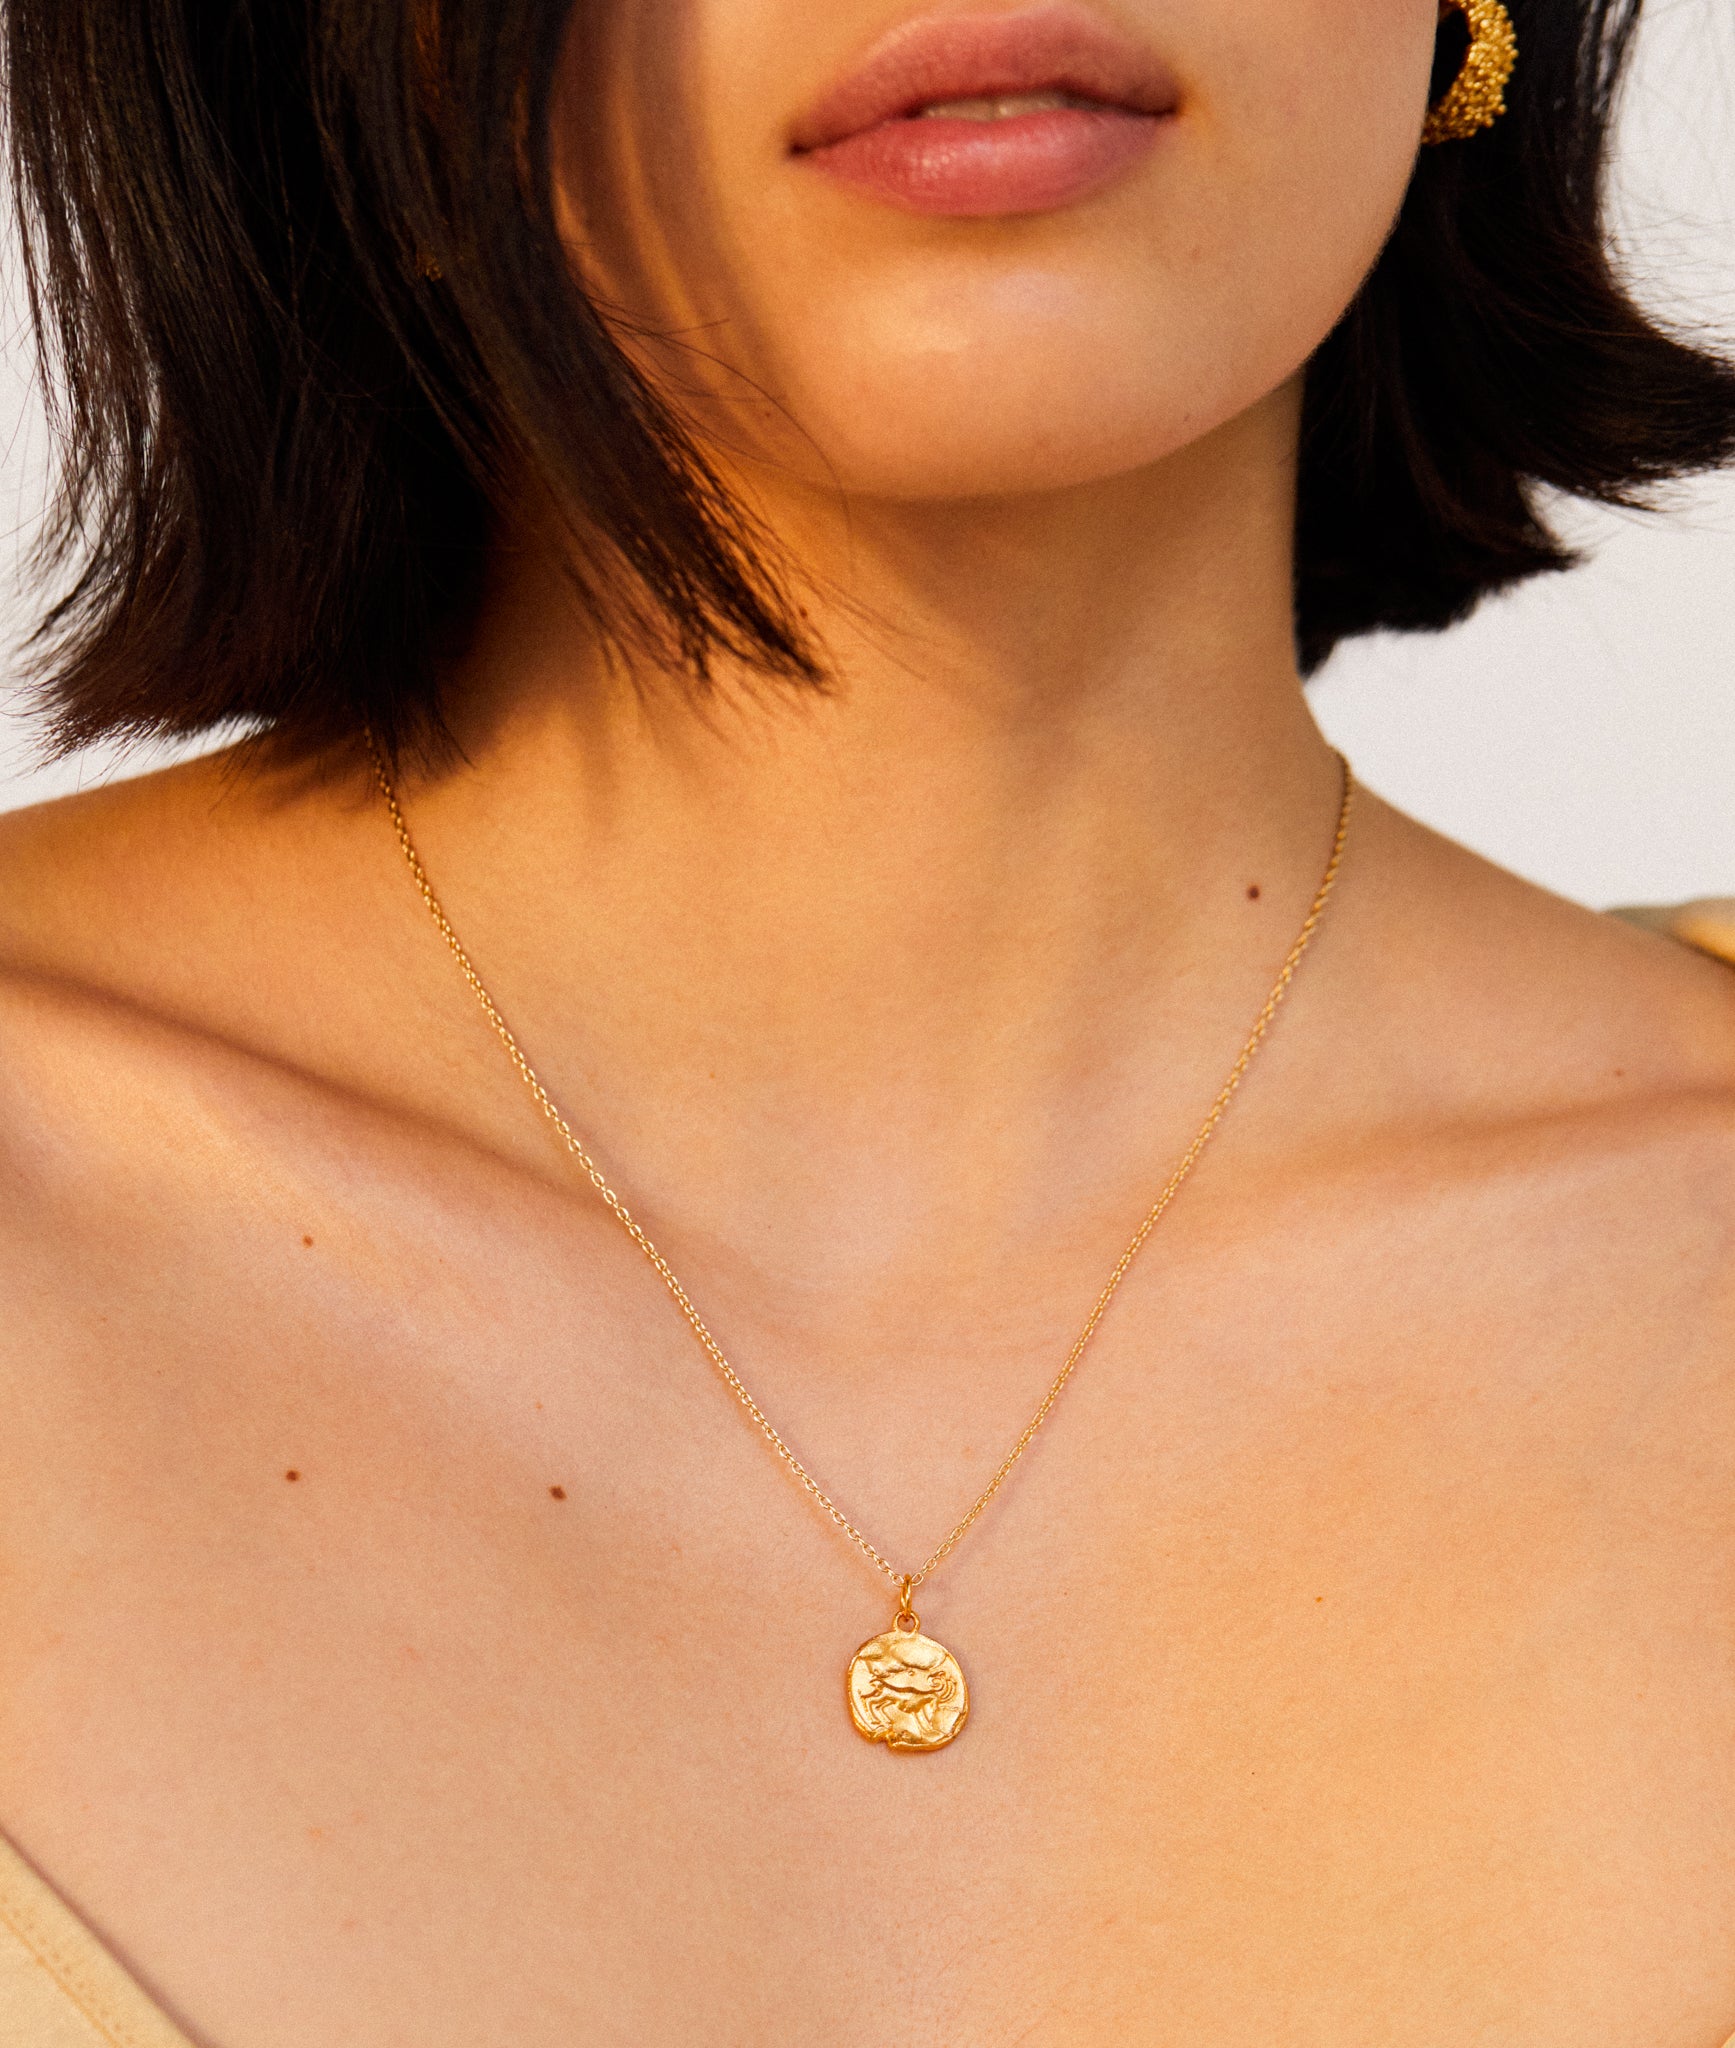 detail of model wearing Alighieri Gold Aries Zodiac Necklace Medallion